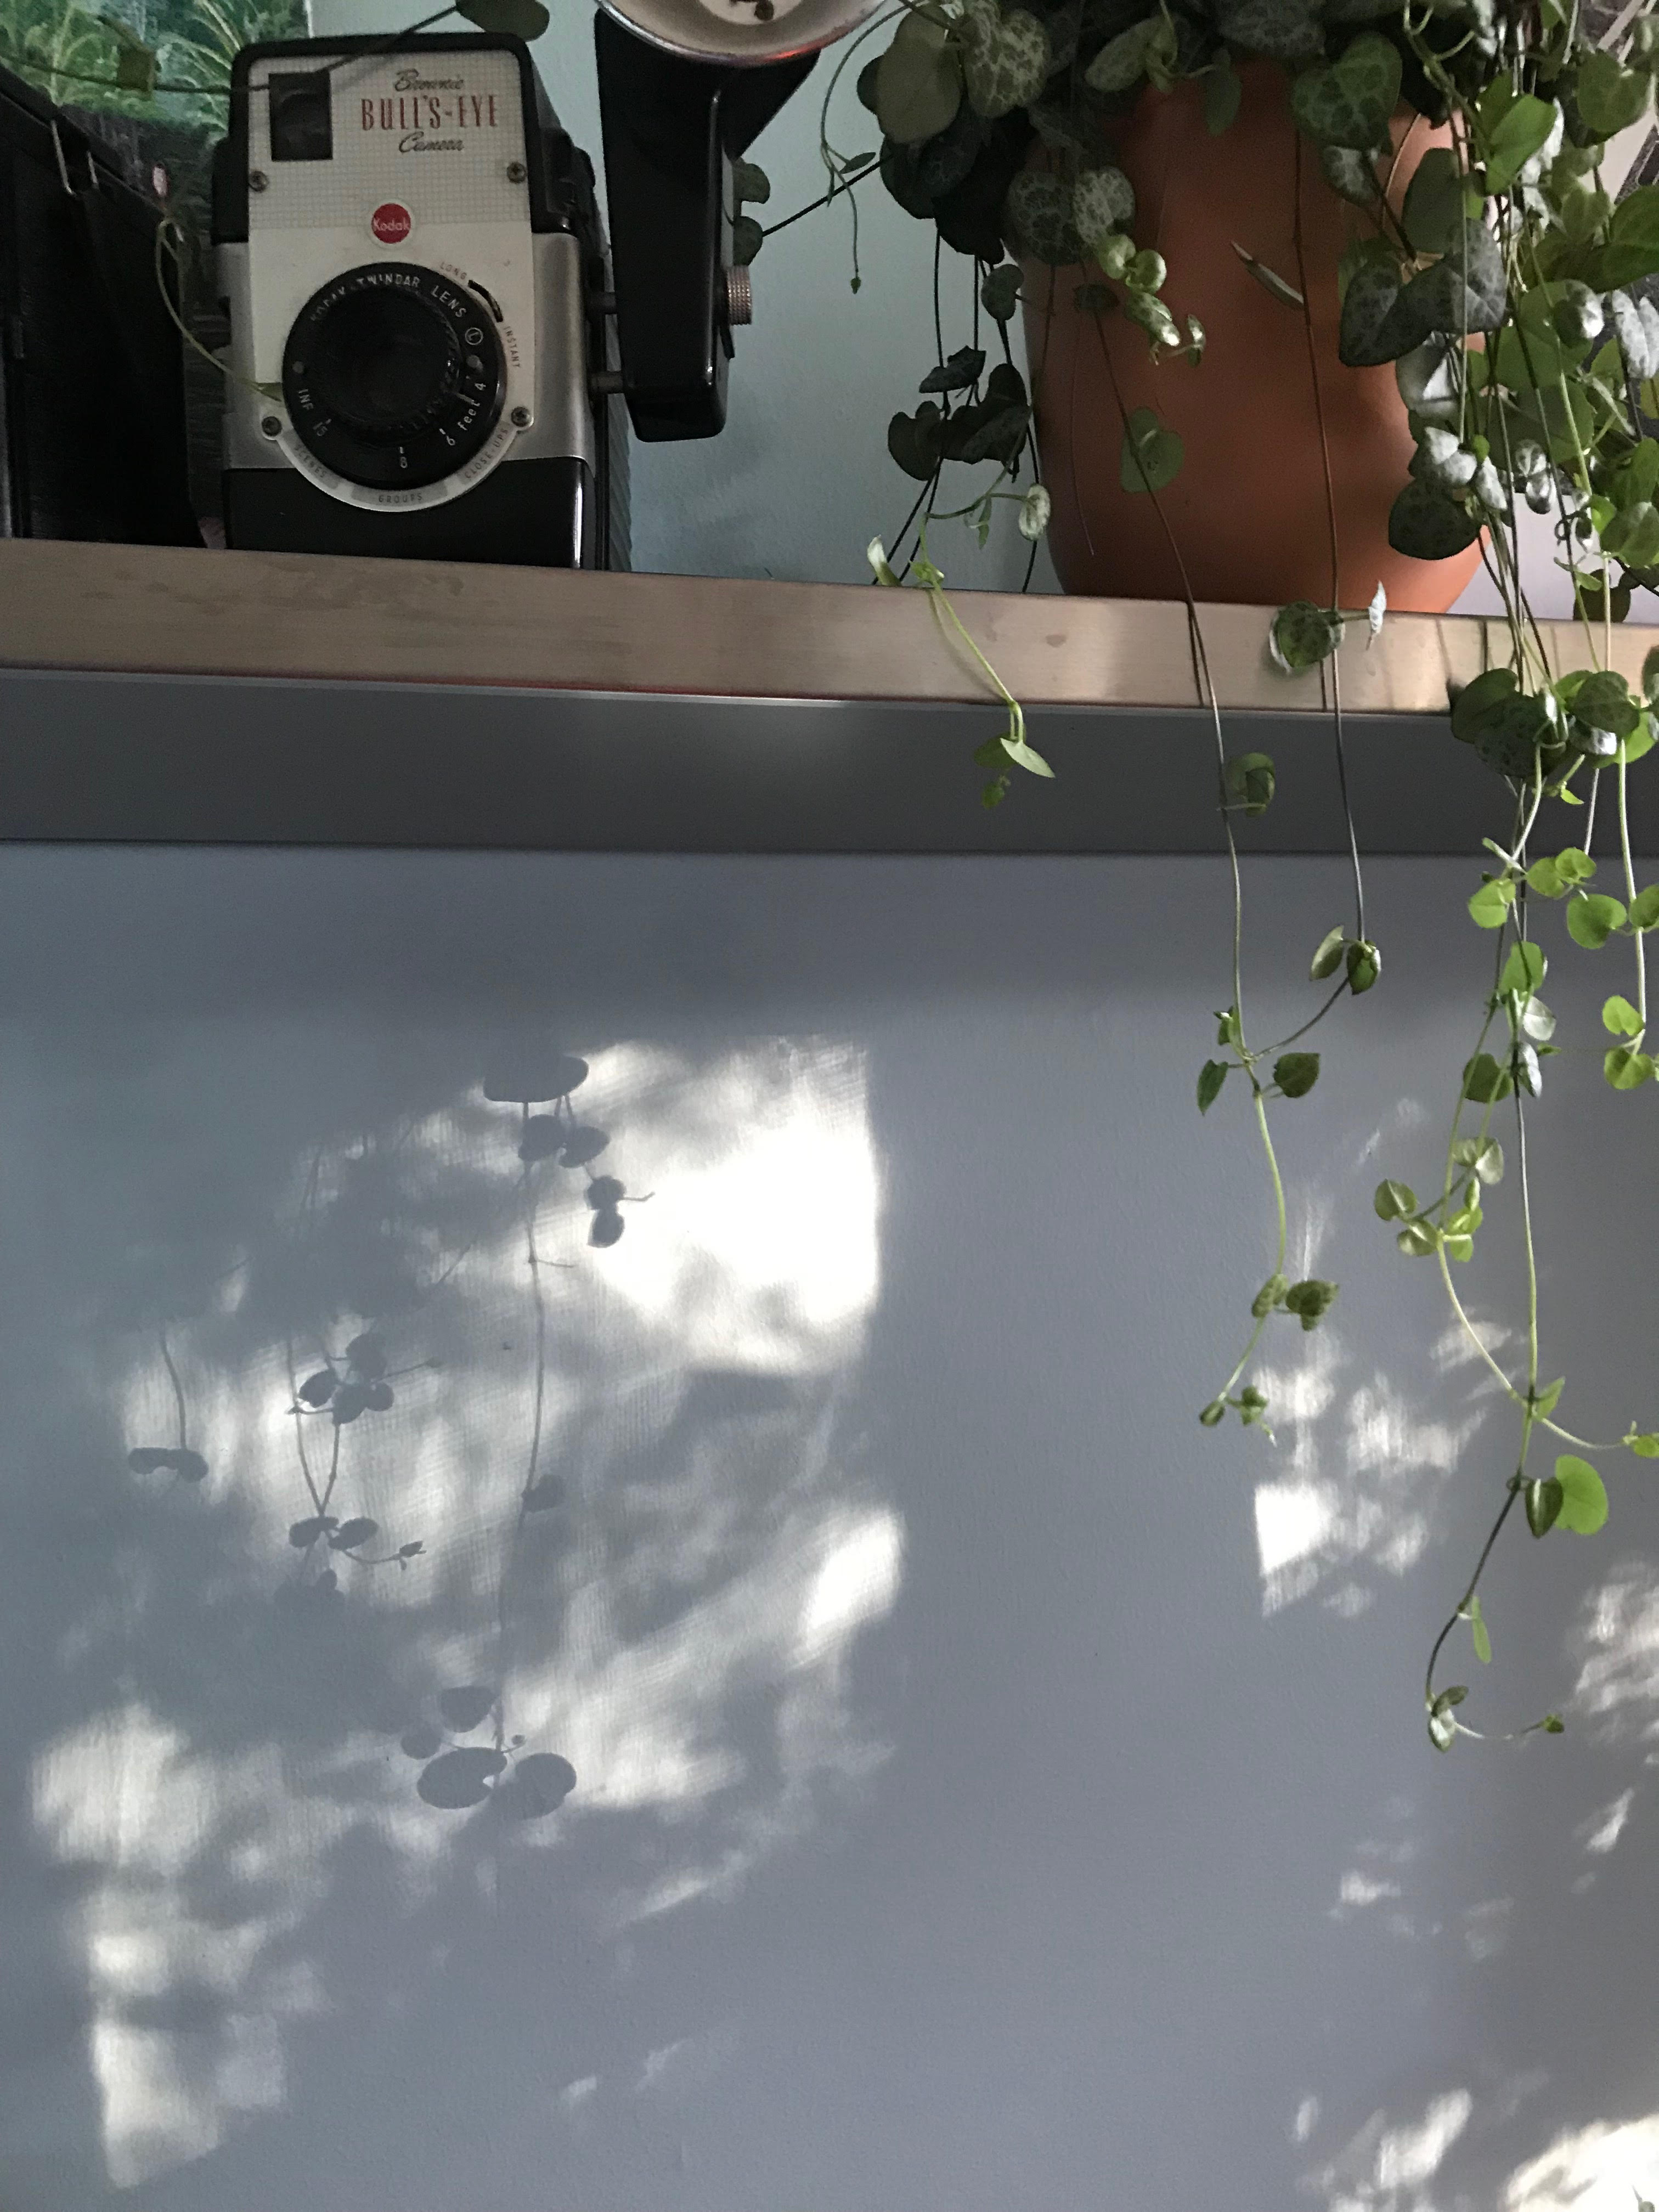 This is a photo of a camera and a plant being reflected on a wall